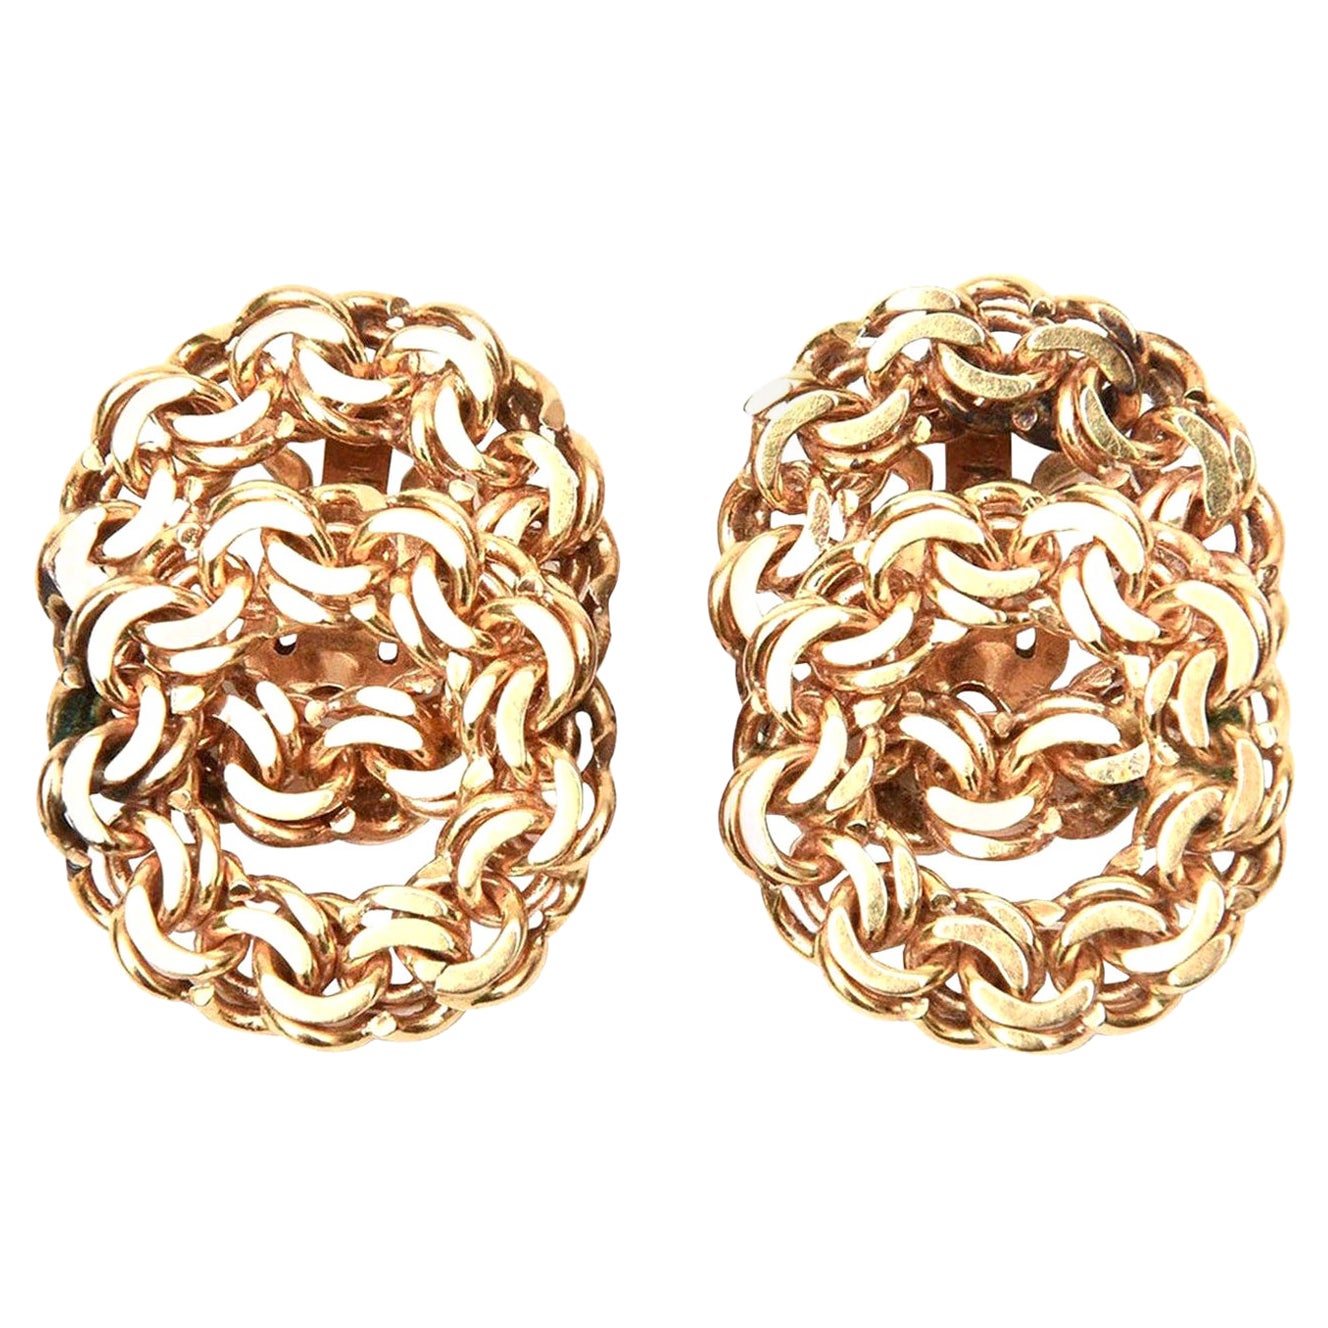 14 Karat Gold Sculptural Twisted Chains Clip-On Earrings Vintage For Sale